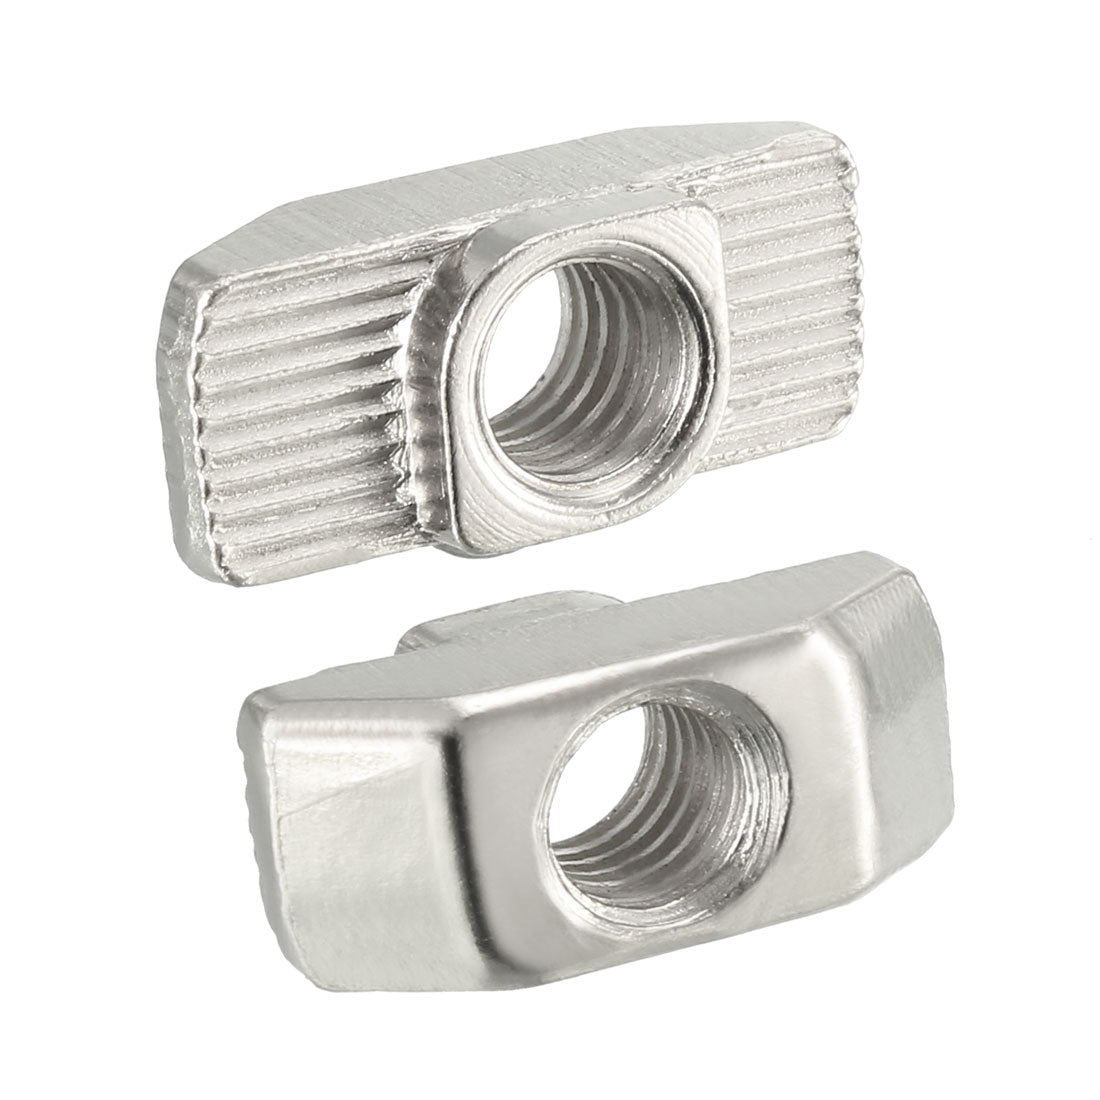 uxcell Uxcell Sliding T Slot Nuts, M6 Thread for 4040 Series Aluminum Extrusion Profile 30pcs